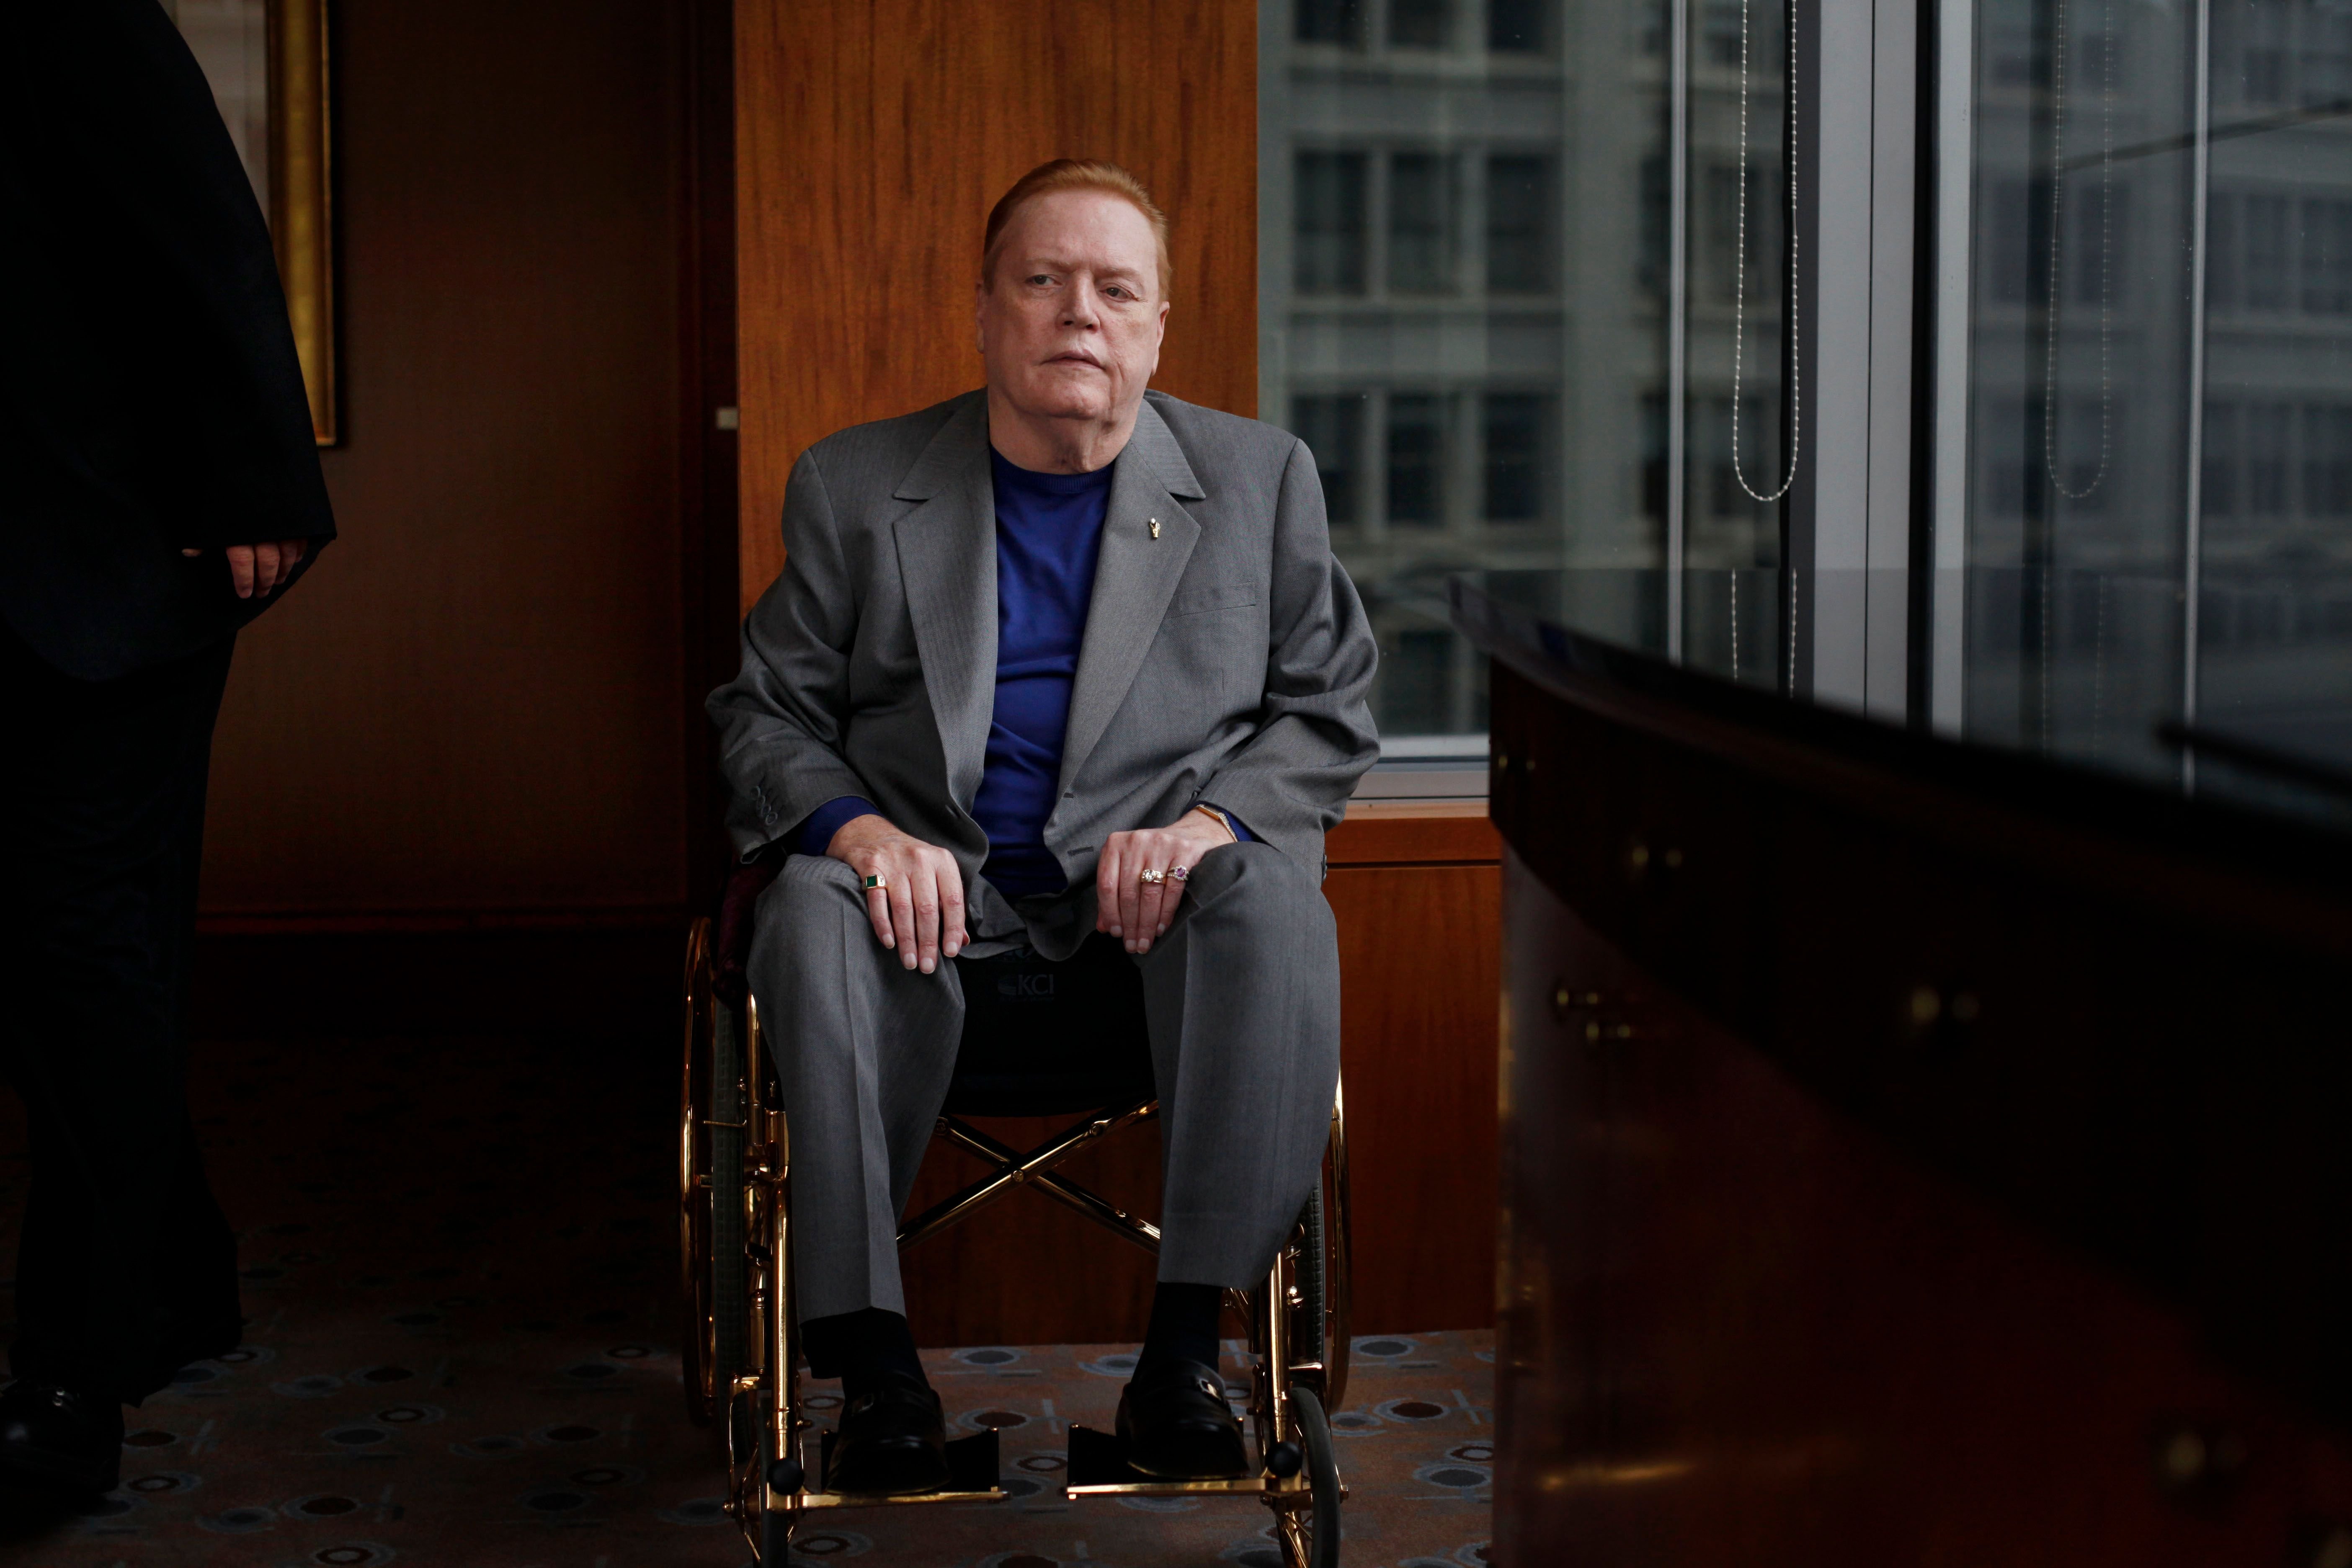 Larry Flynt sits for a portrait at the Four Seasons Hotel on Friday May 13, 2011. | Photo: Getty Images